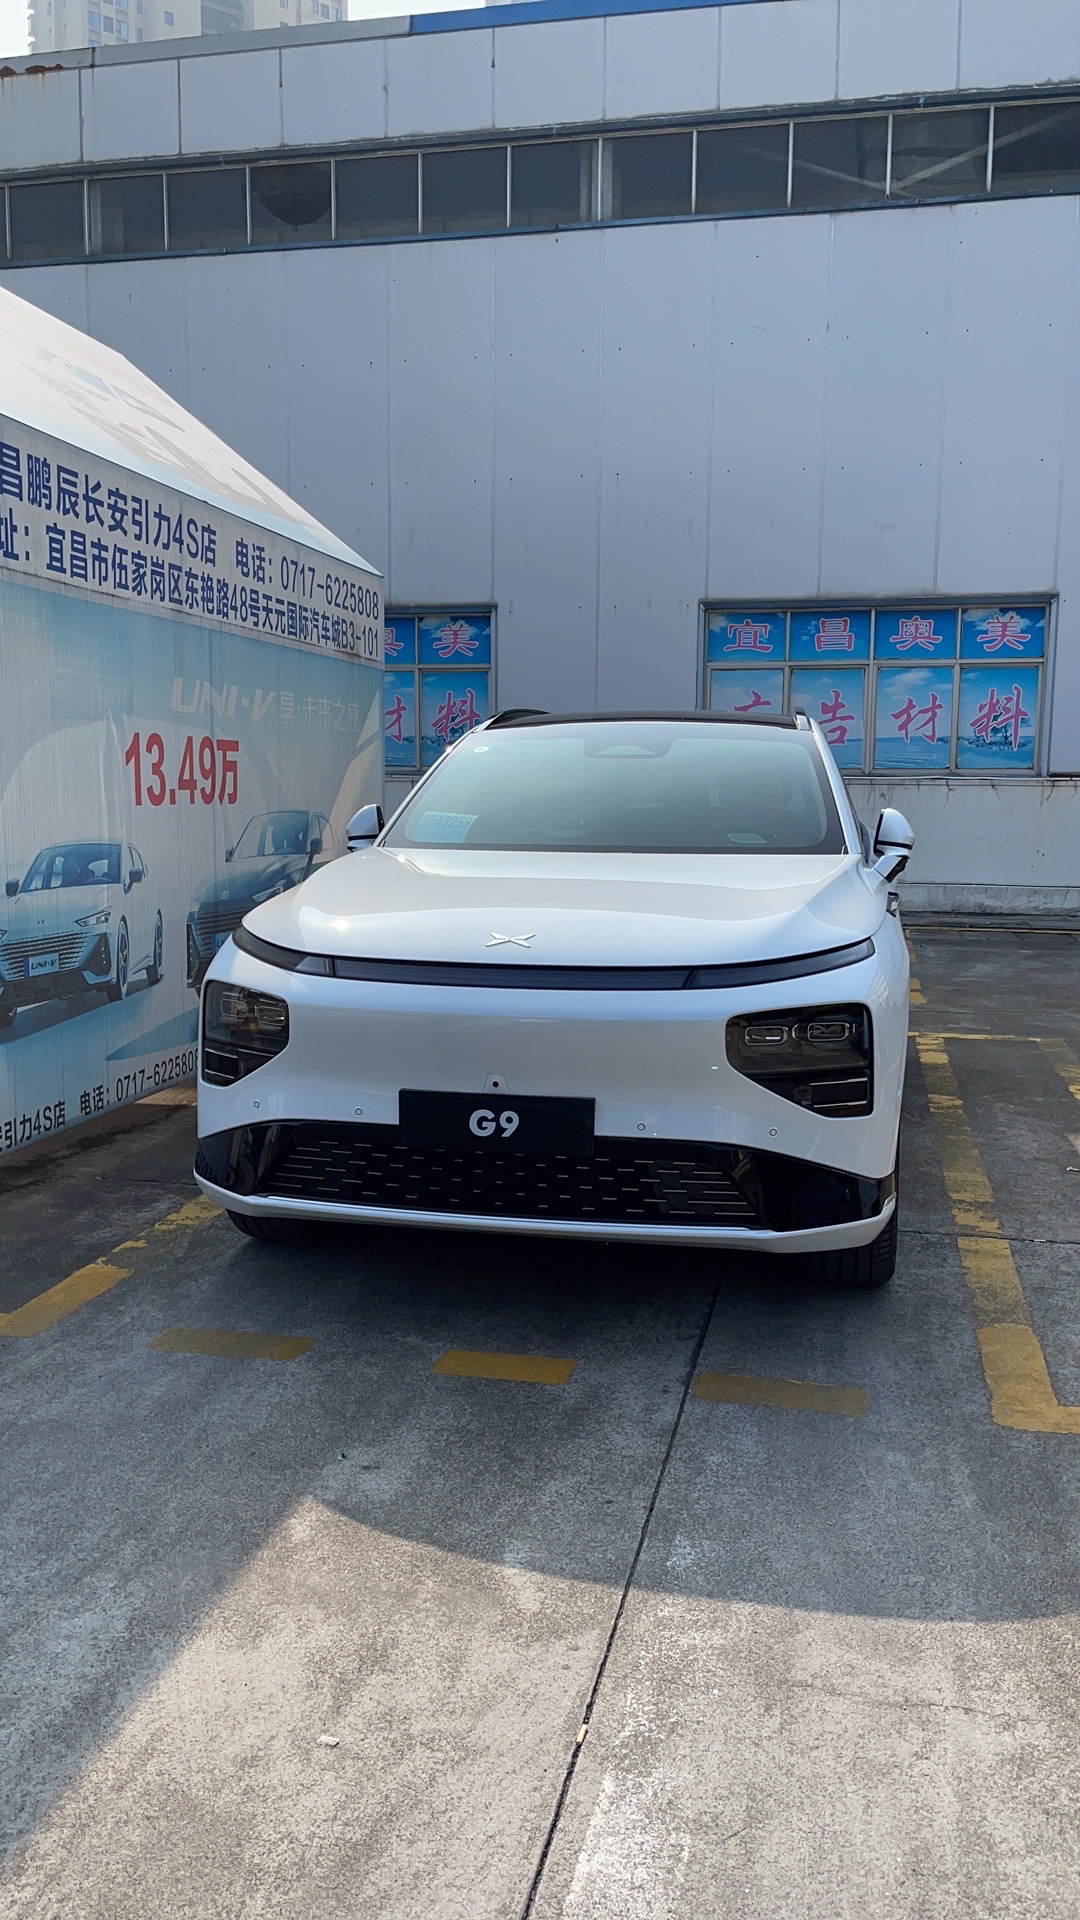 Purchased Xiaopeng G9 and drove 70km on the first day.